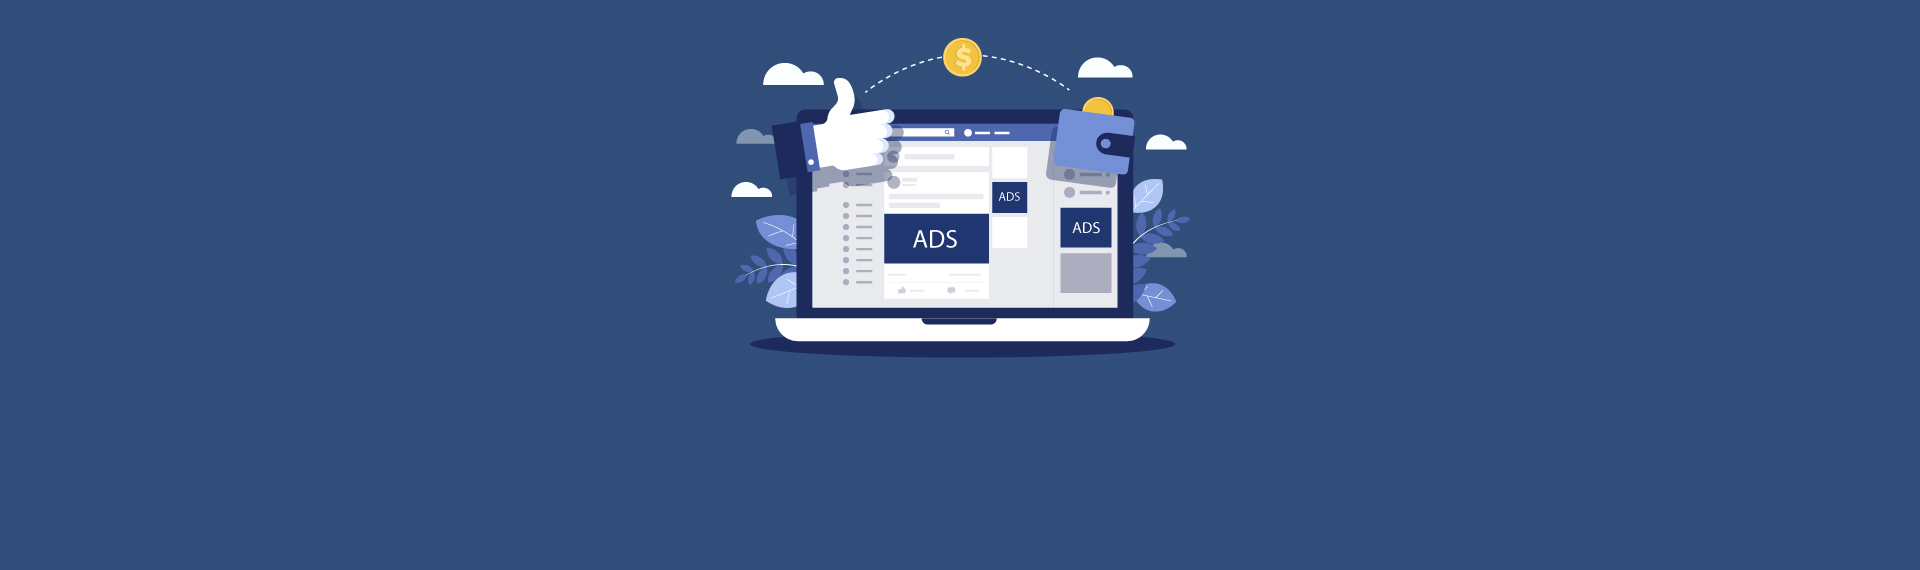 How to measure Facebook ads effectiveness